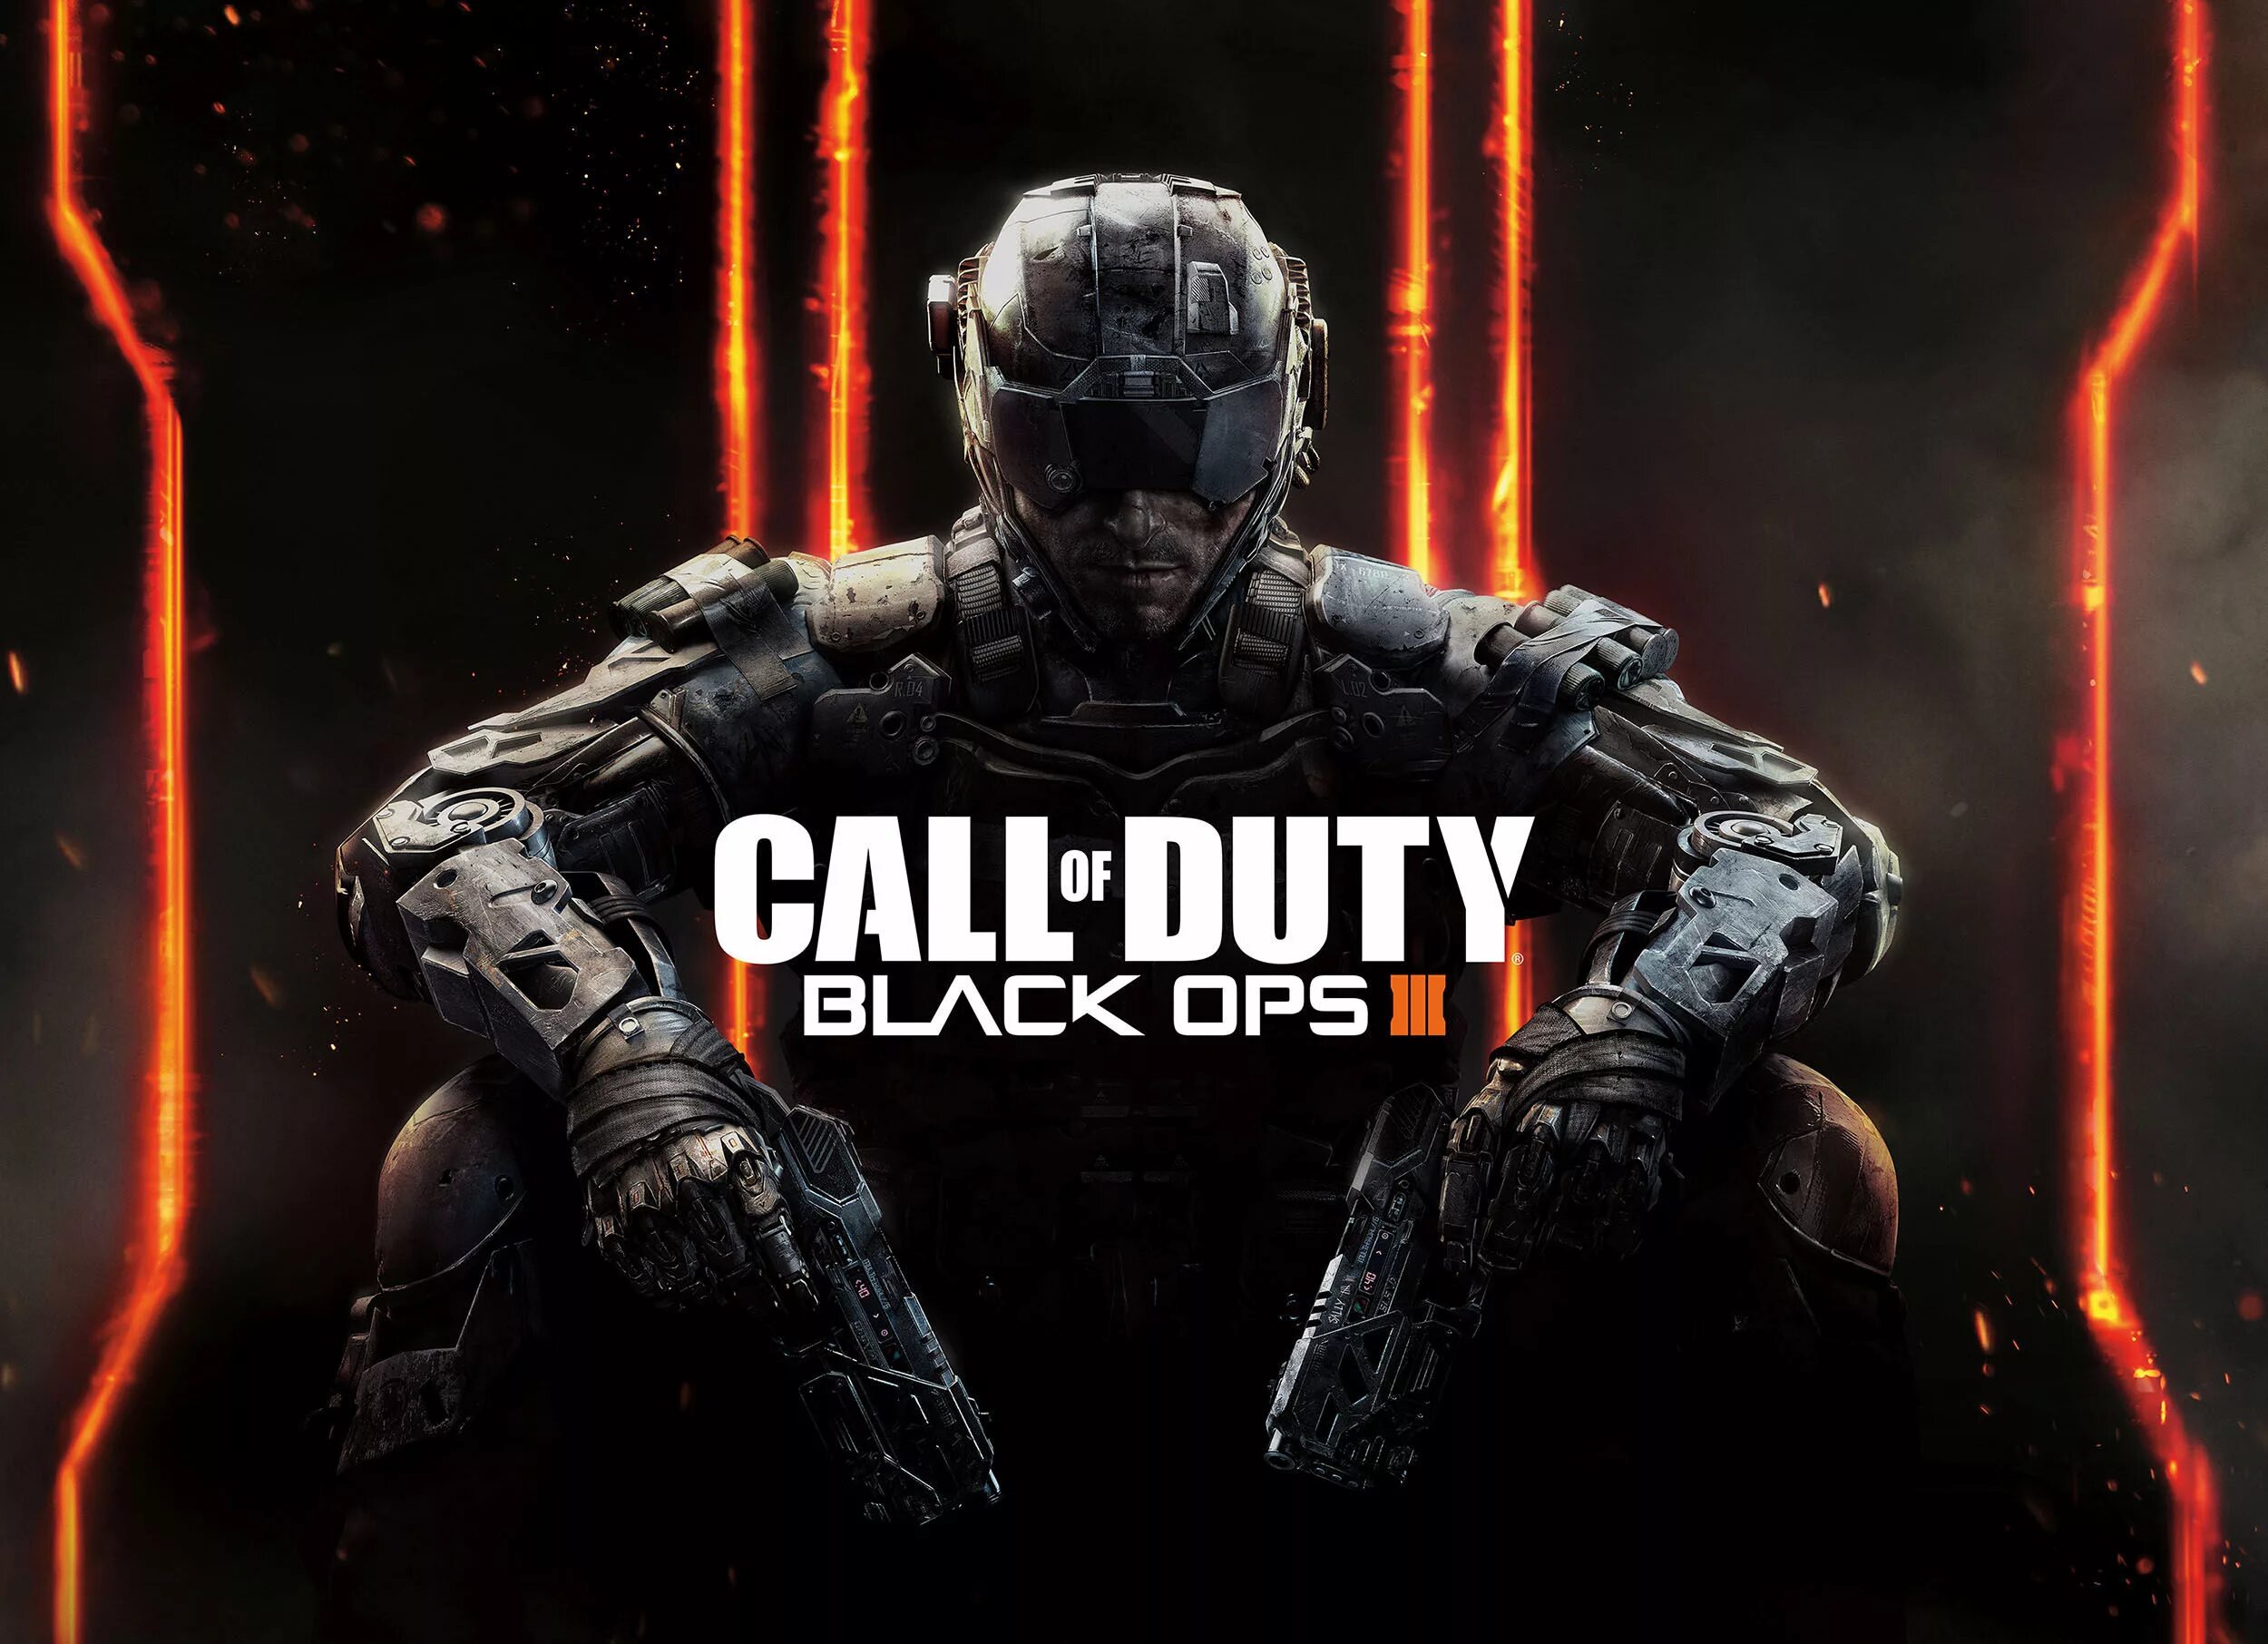 Call of Duty Black ops 3. Black ops 3 Постер. Игра Call of Duty: Black ops III. Call of Duty Black ops 3 ps4.